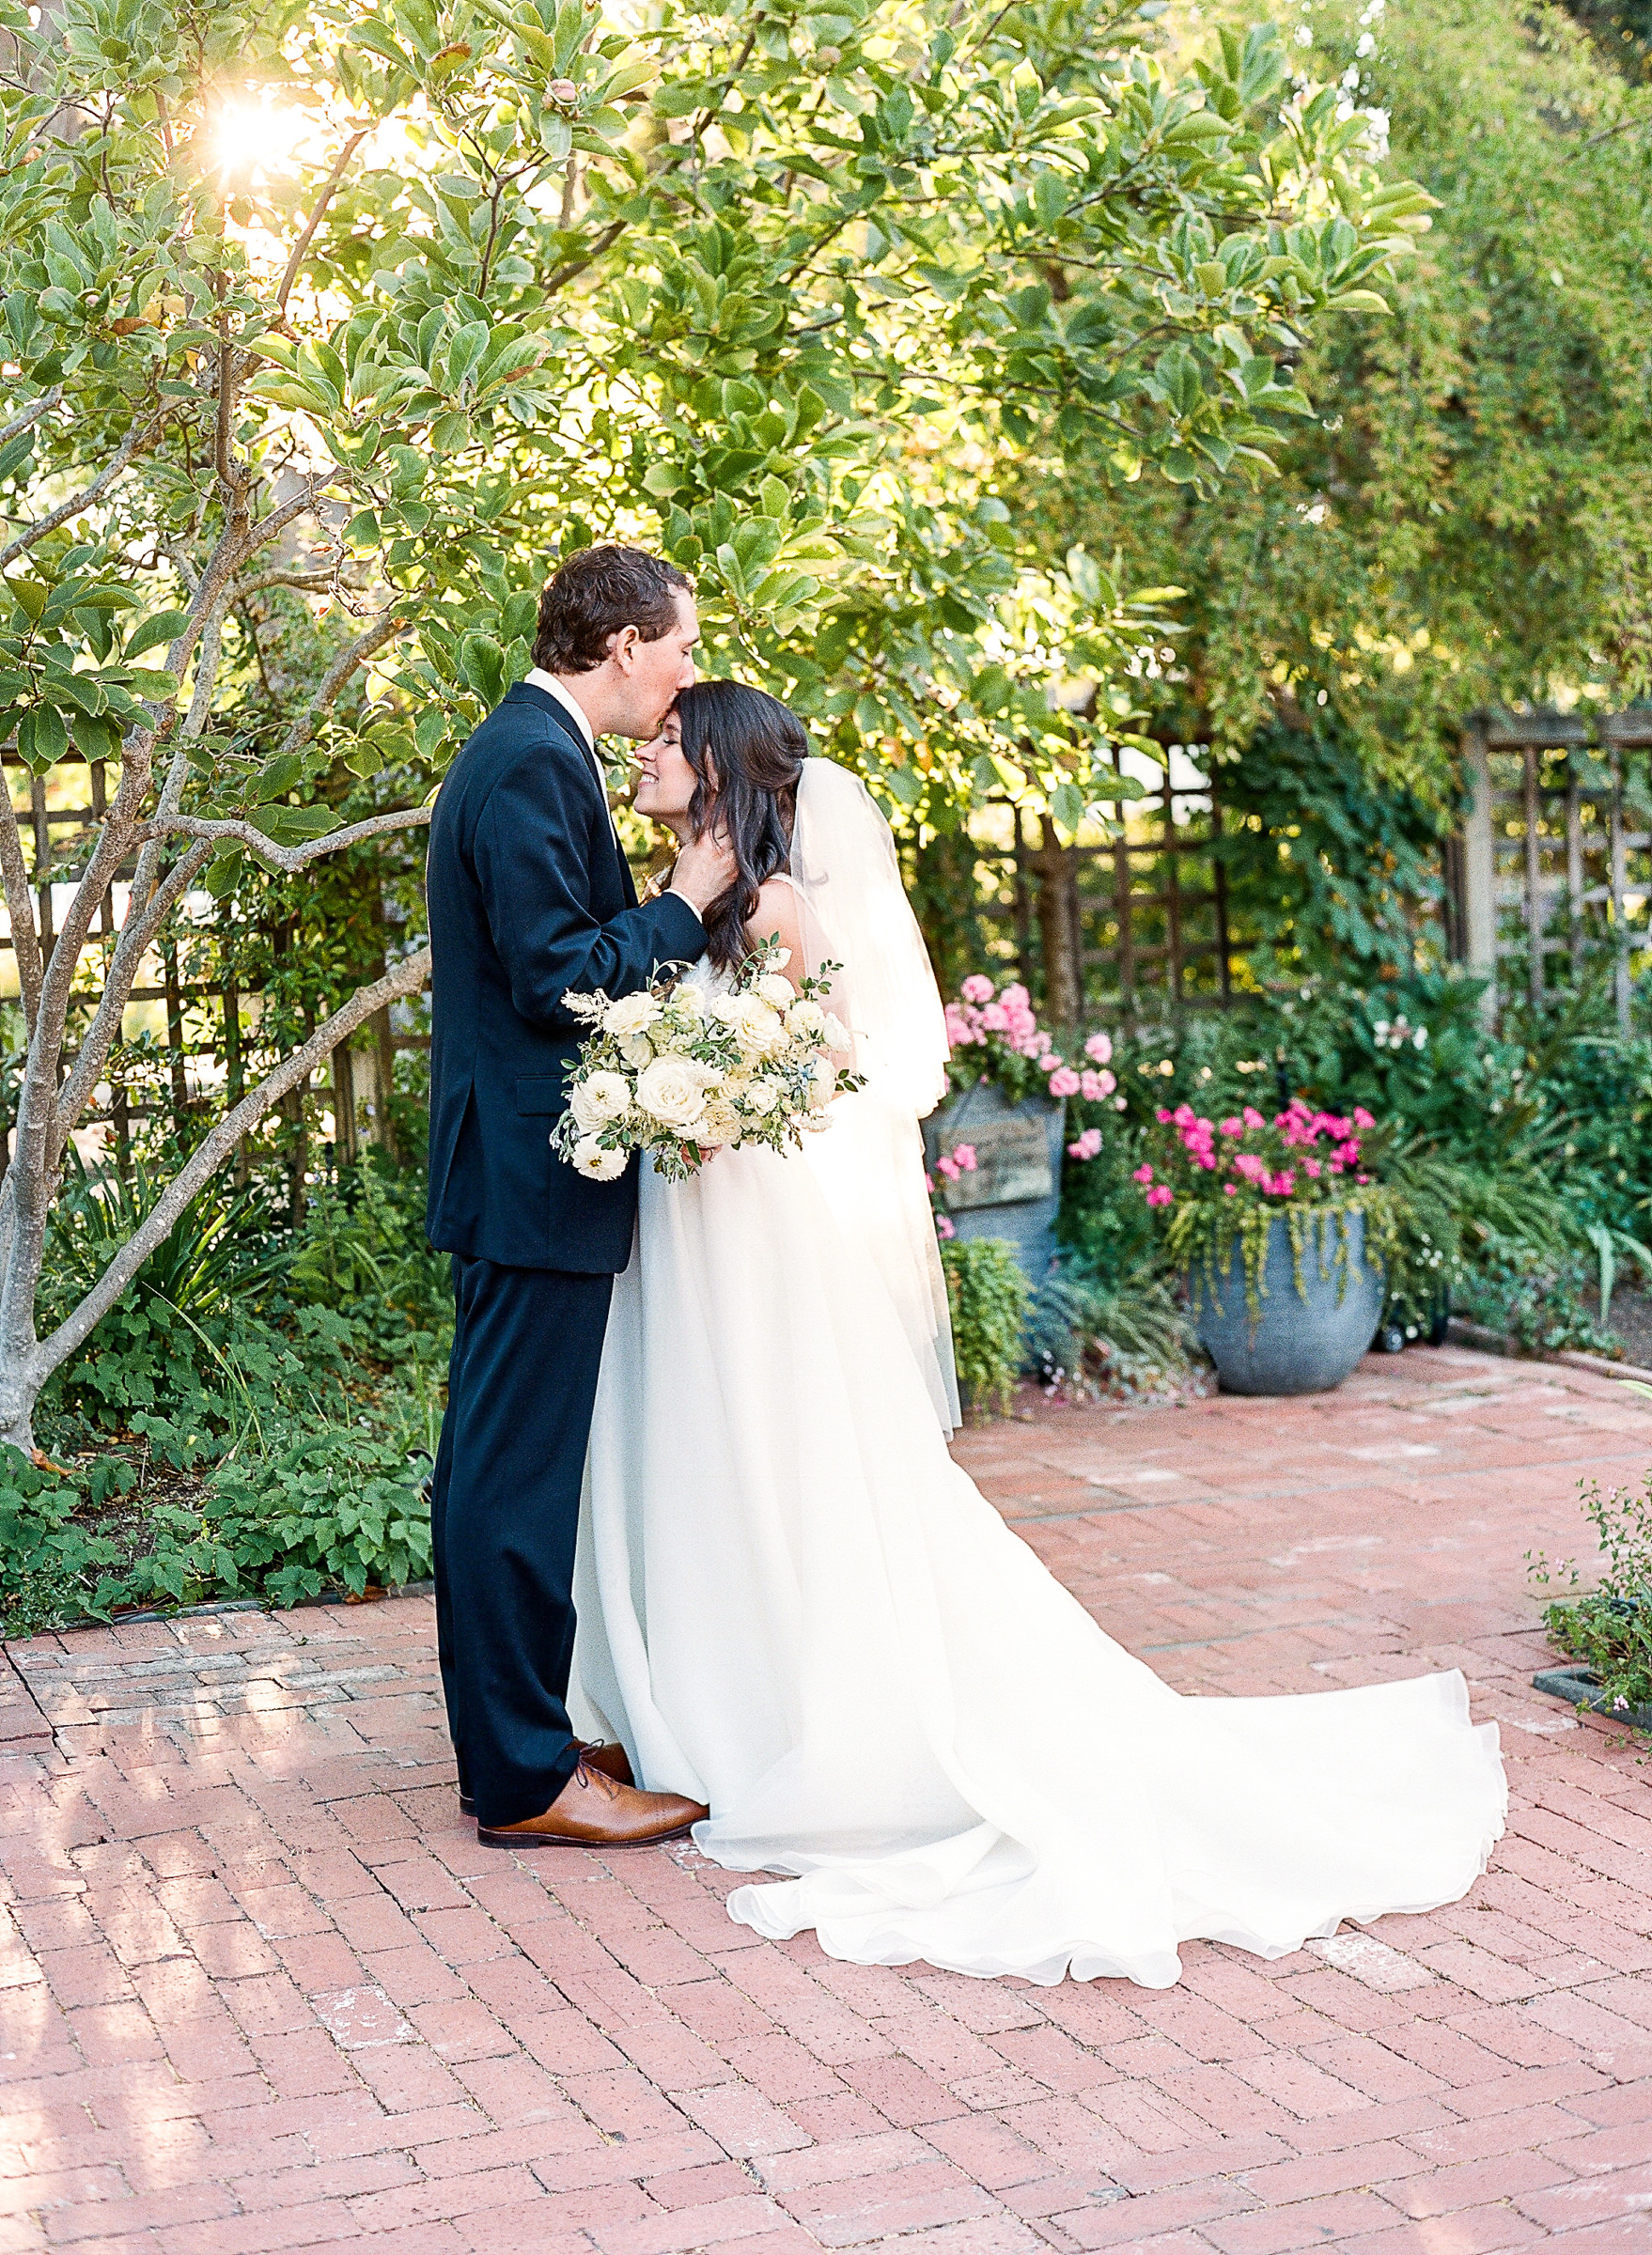 Groom kissing Bride on the forehead in the gardens of Los Altos History Museum during their wedding